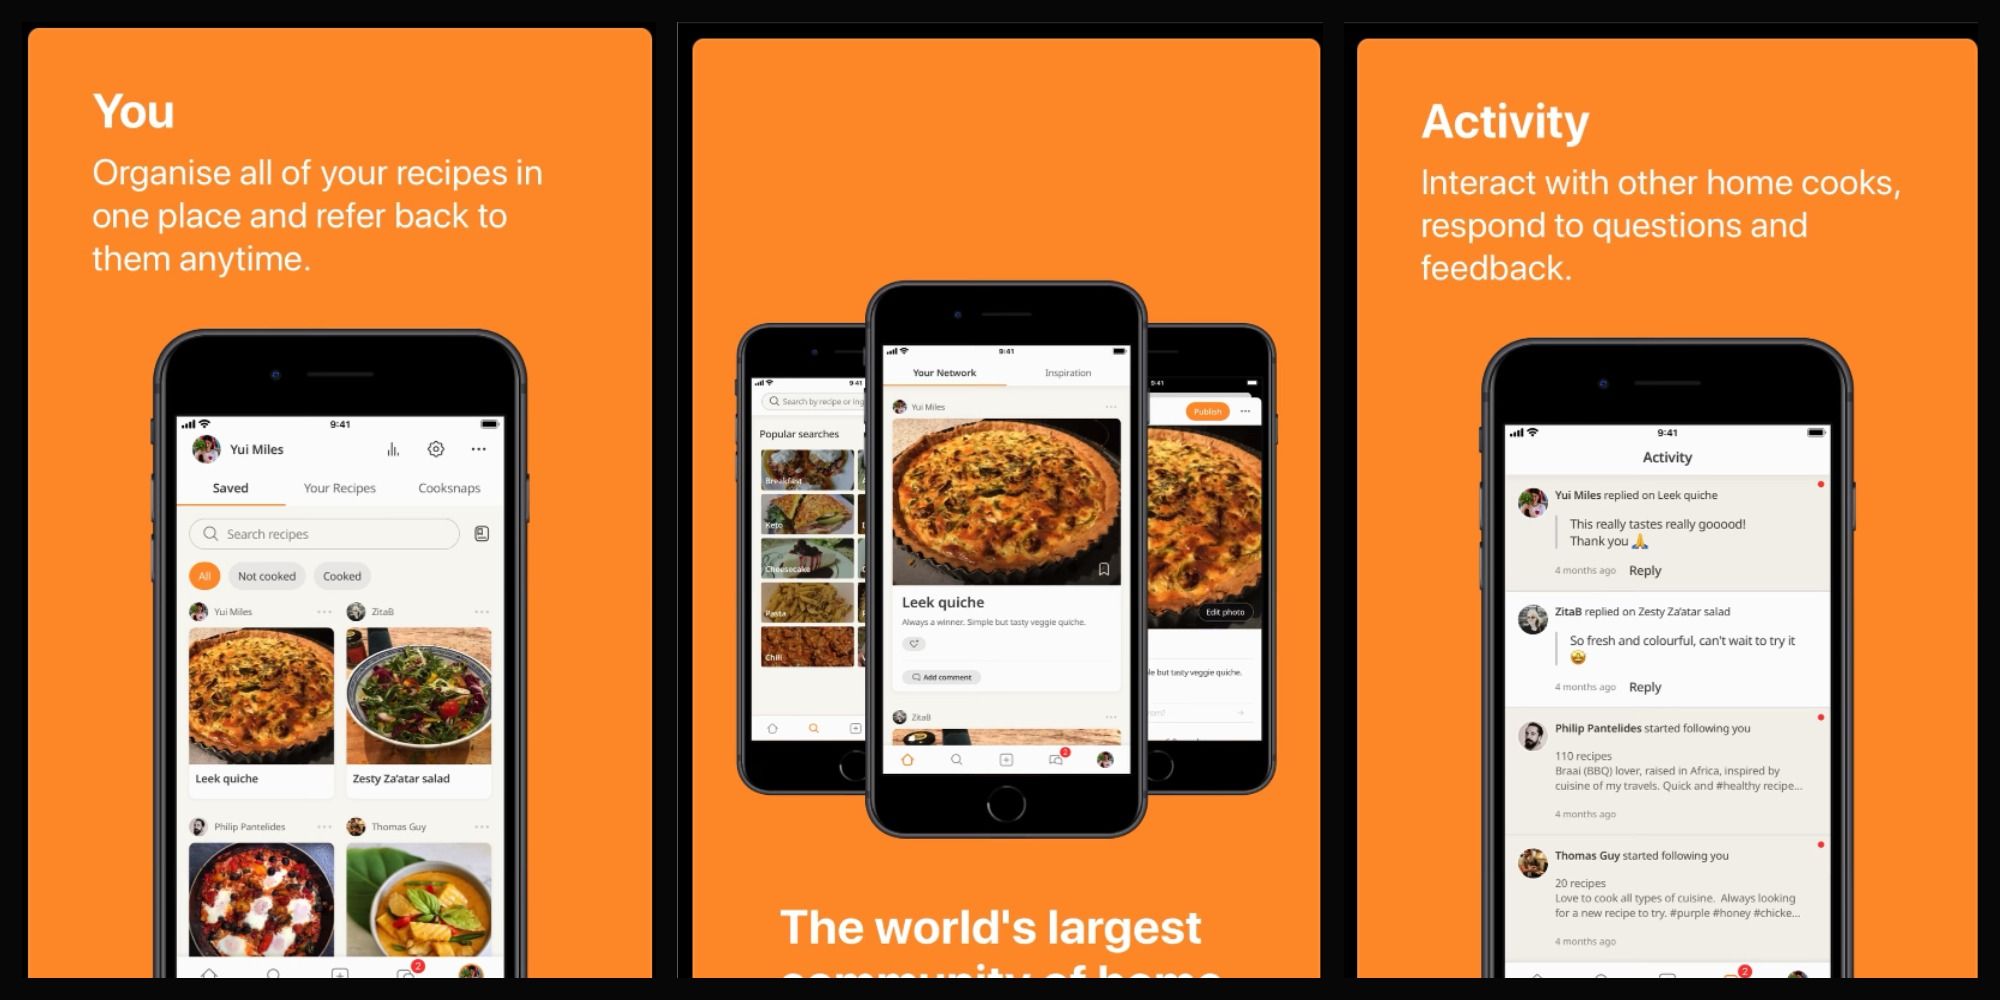 Several images showing how the Cookpad app works